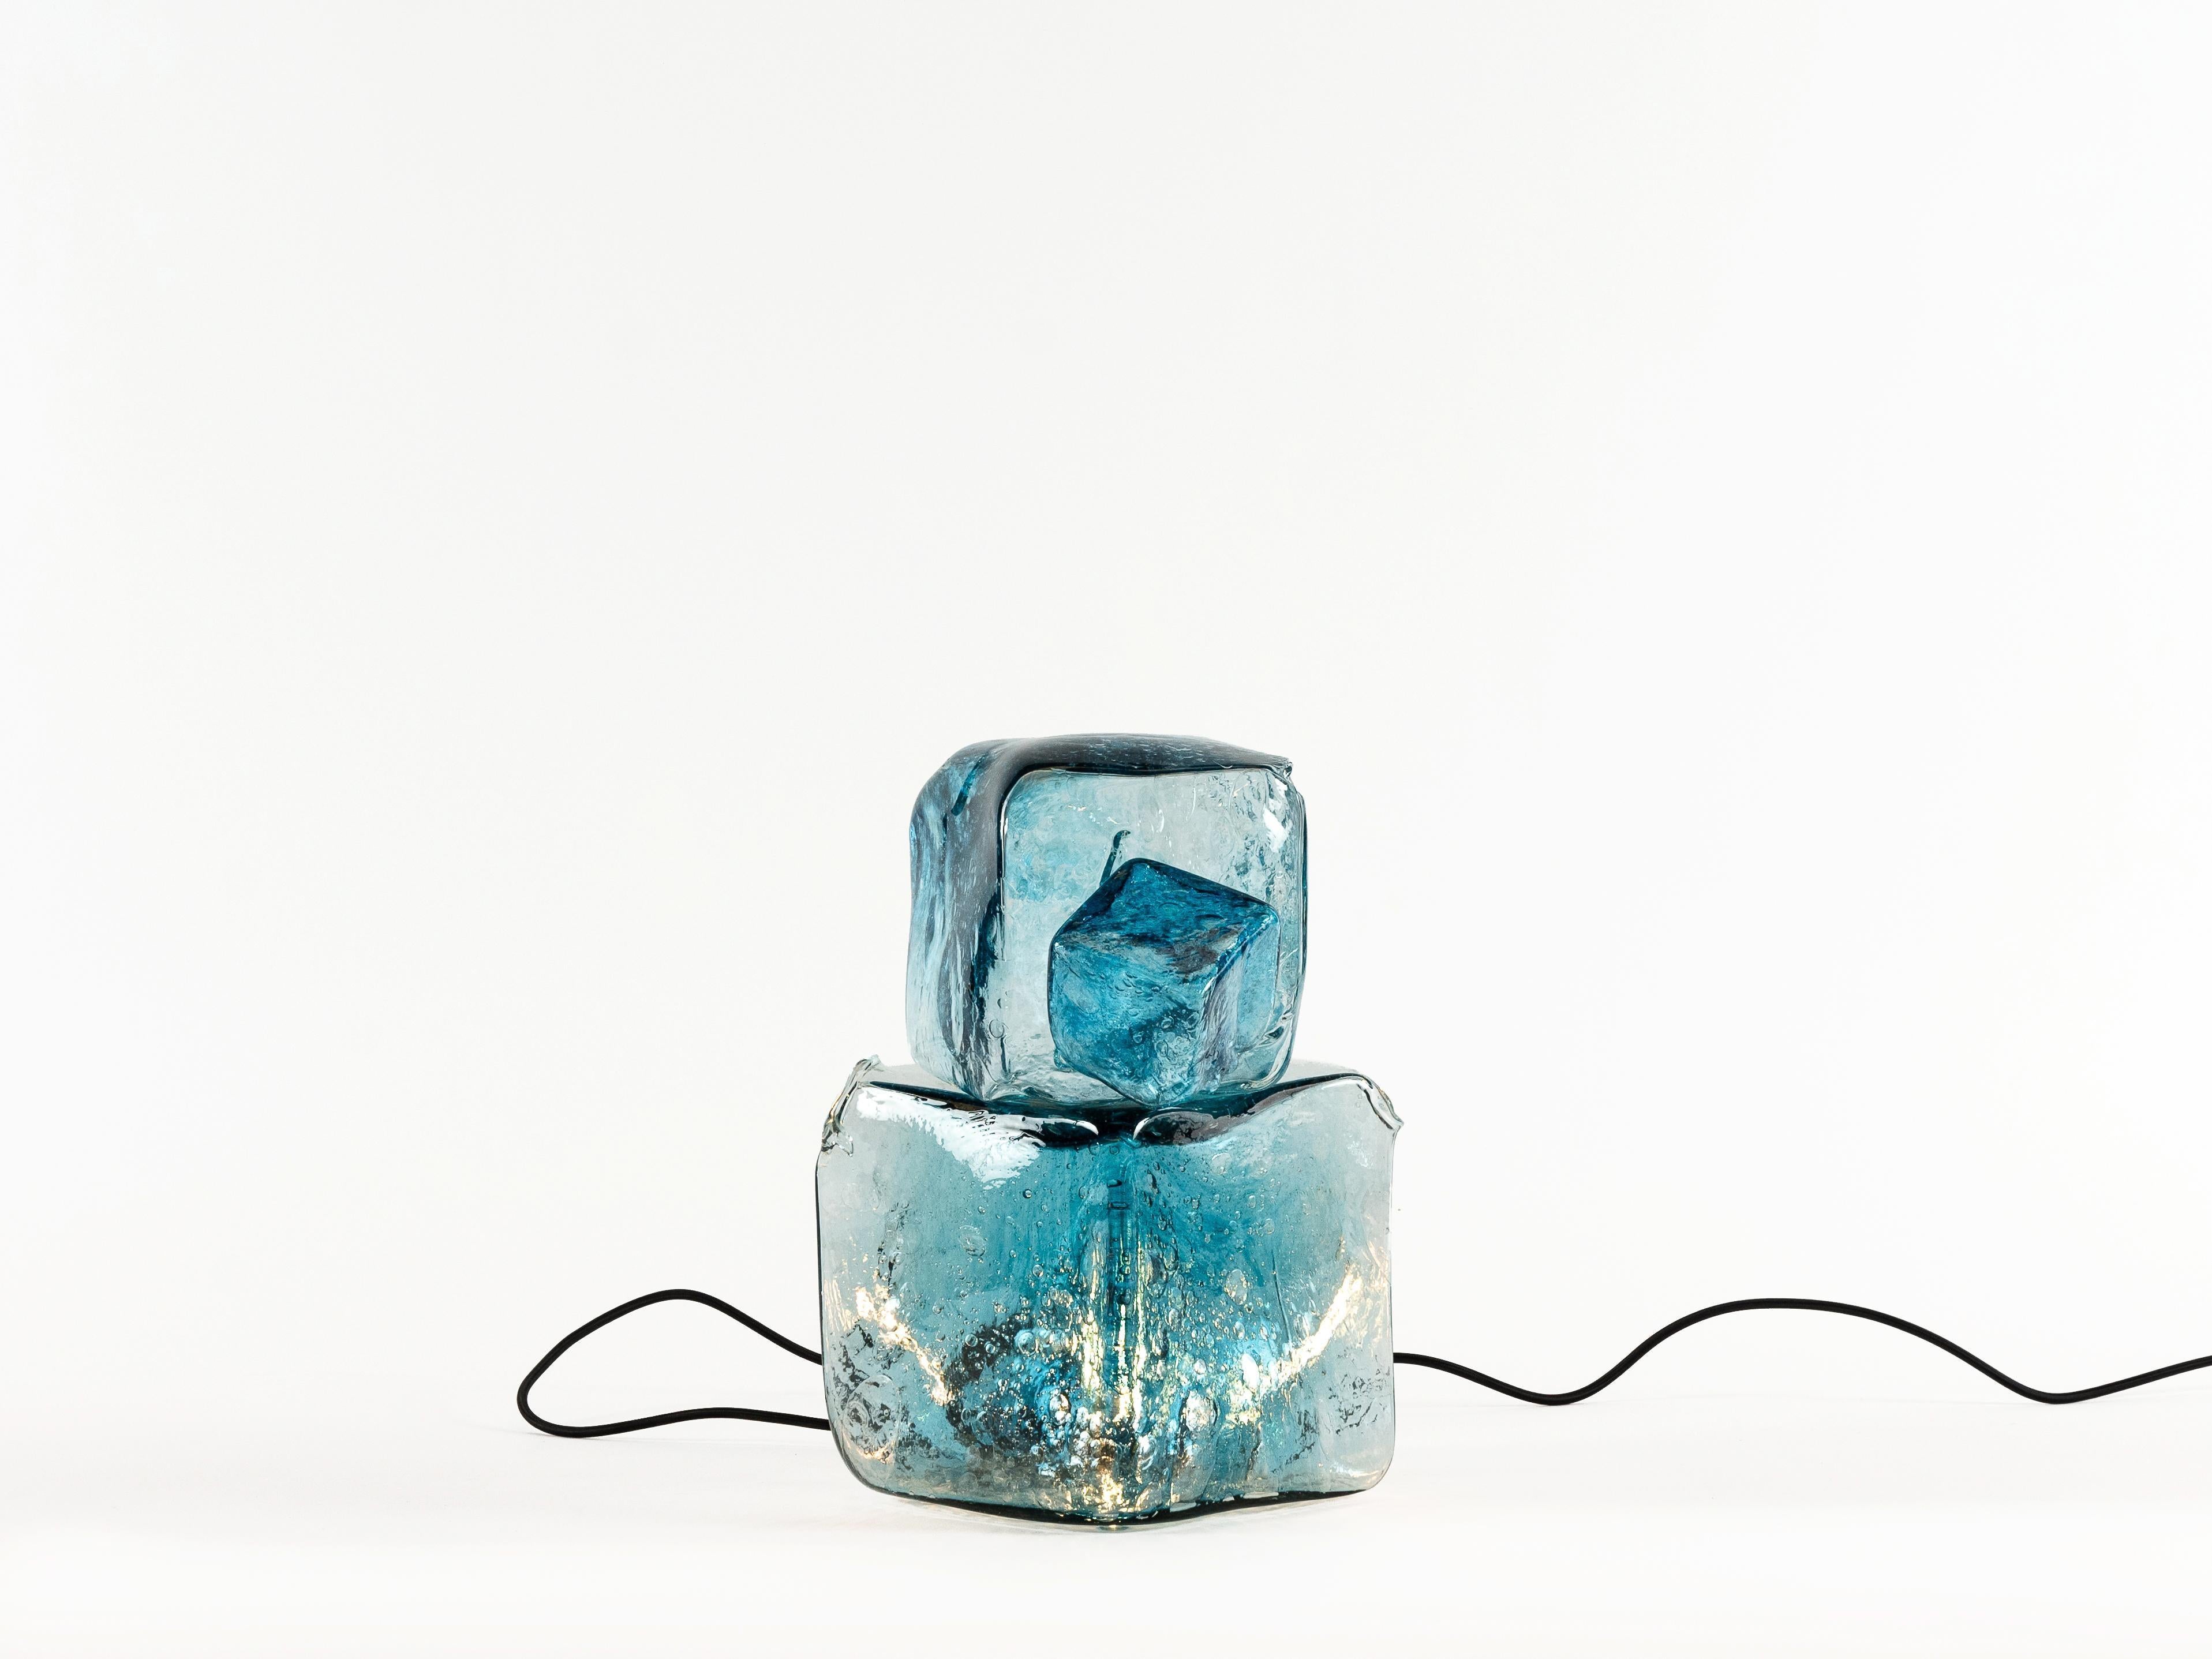 Twentieth exhibitions is proud to present the début of Hydrochrom, a family of glass sculptures by LA-based artist and designer Sébastien Léon. Hydrochrom, stemming from the Greek expression for “The color of water” consists of tabletop sculptures,